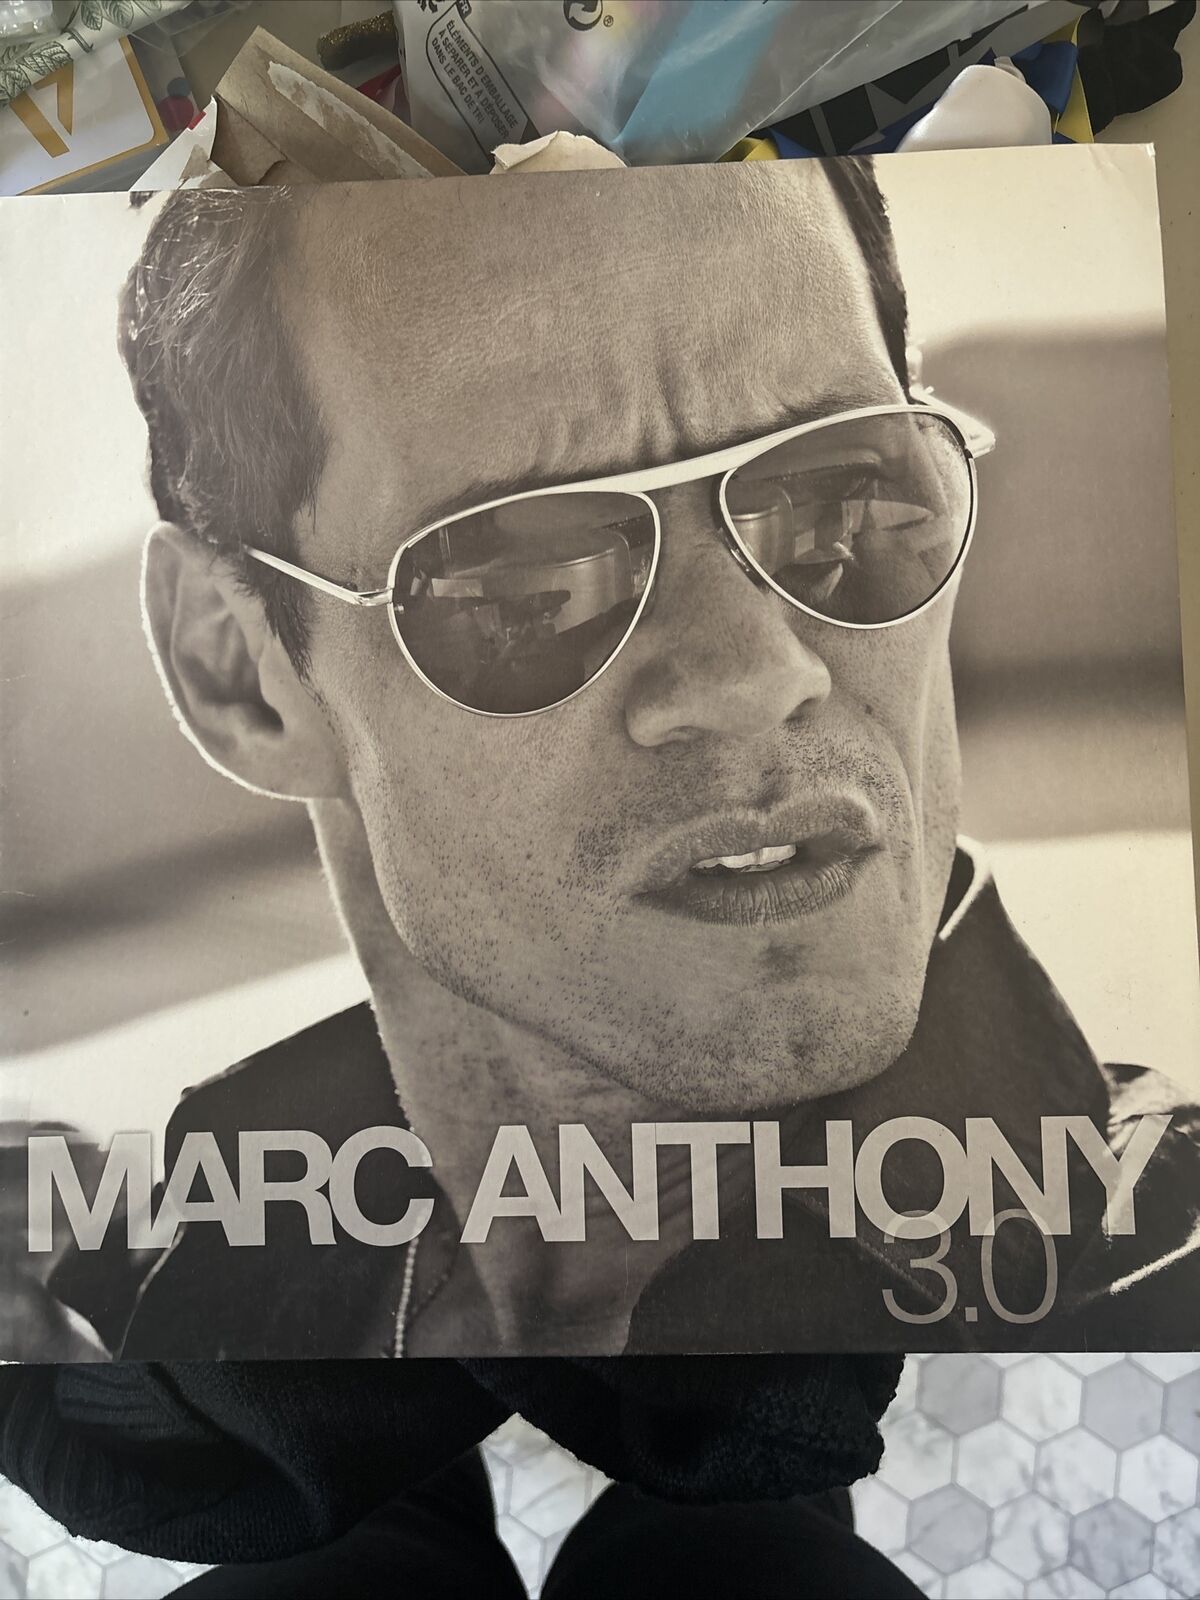 3.0 by Marc Anthony (Record, 2015)